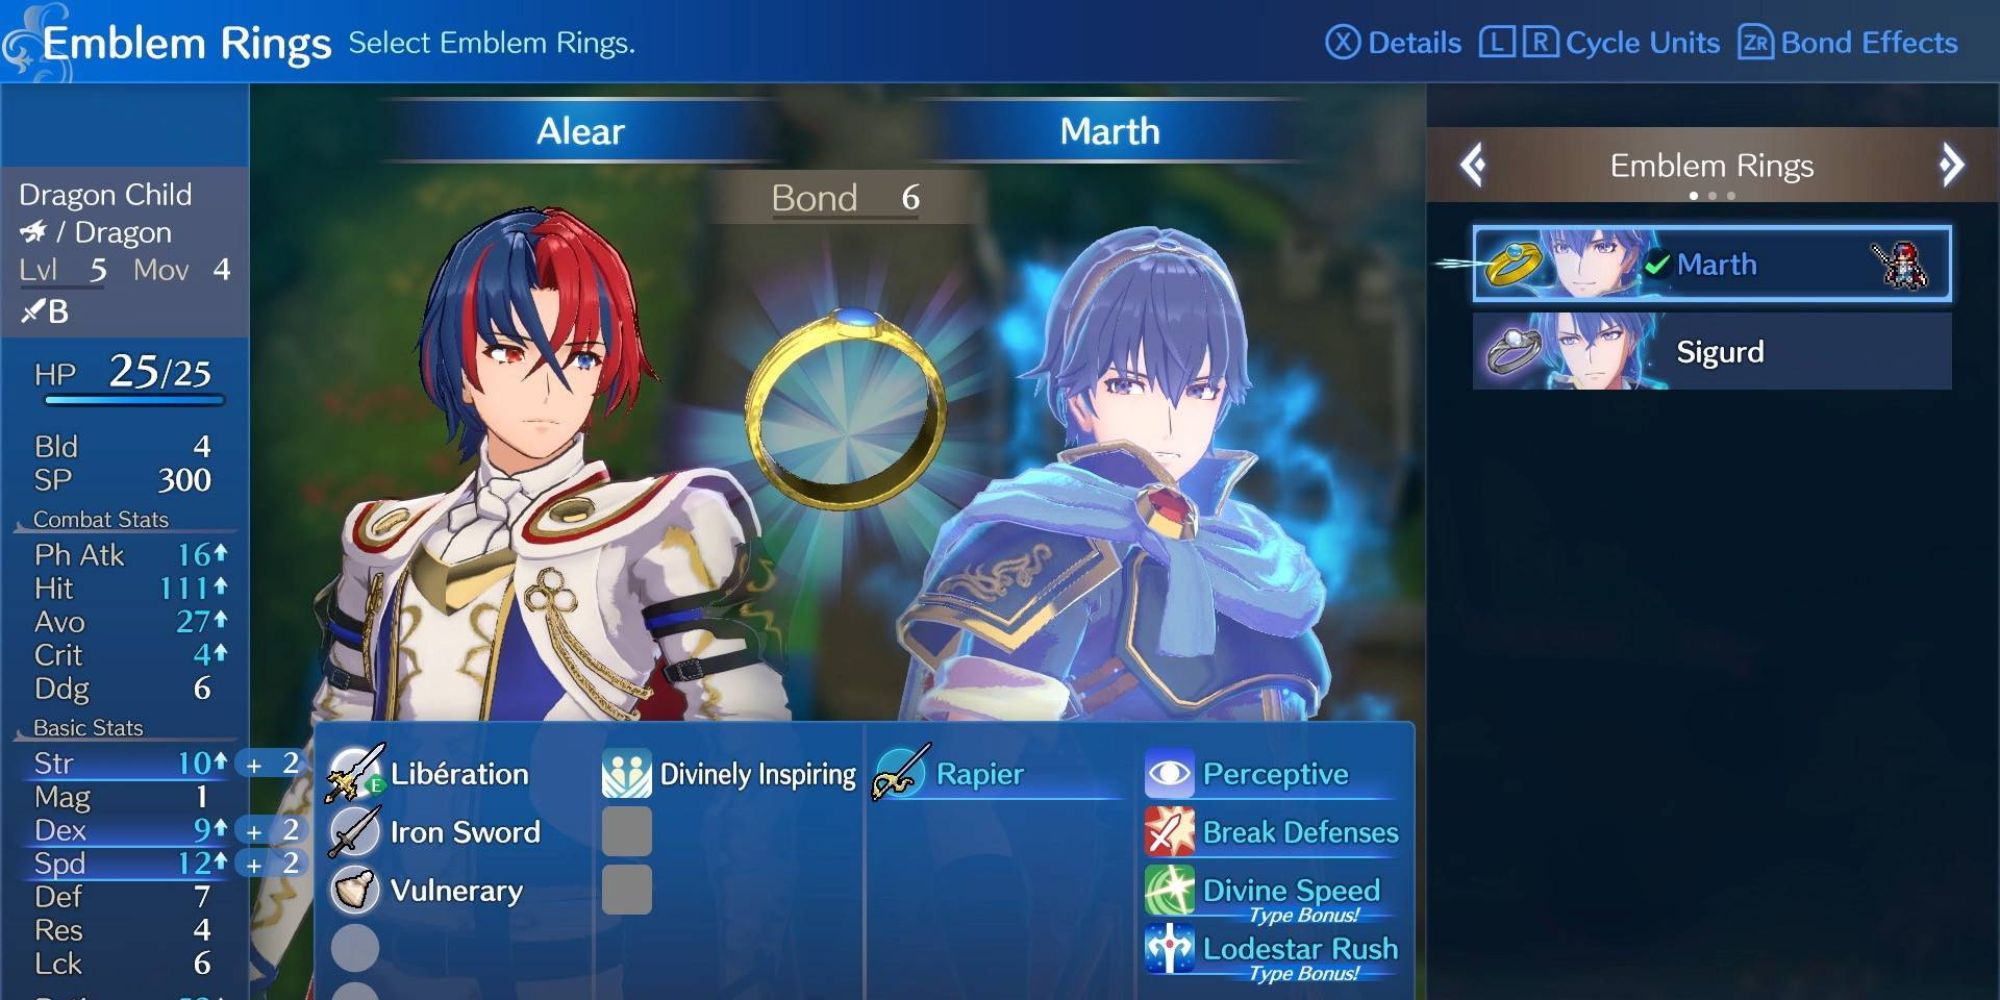 Alear from Fire Emblem: Engage in equipping the Marth Emblem Ring